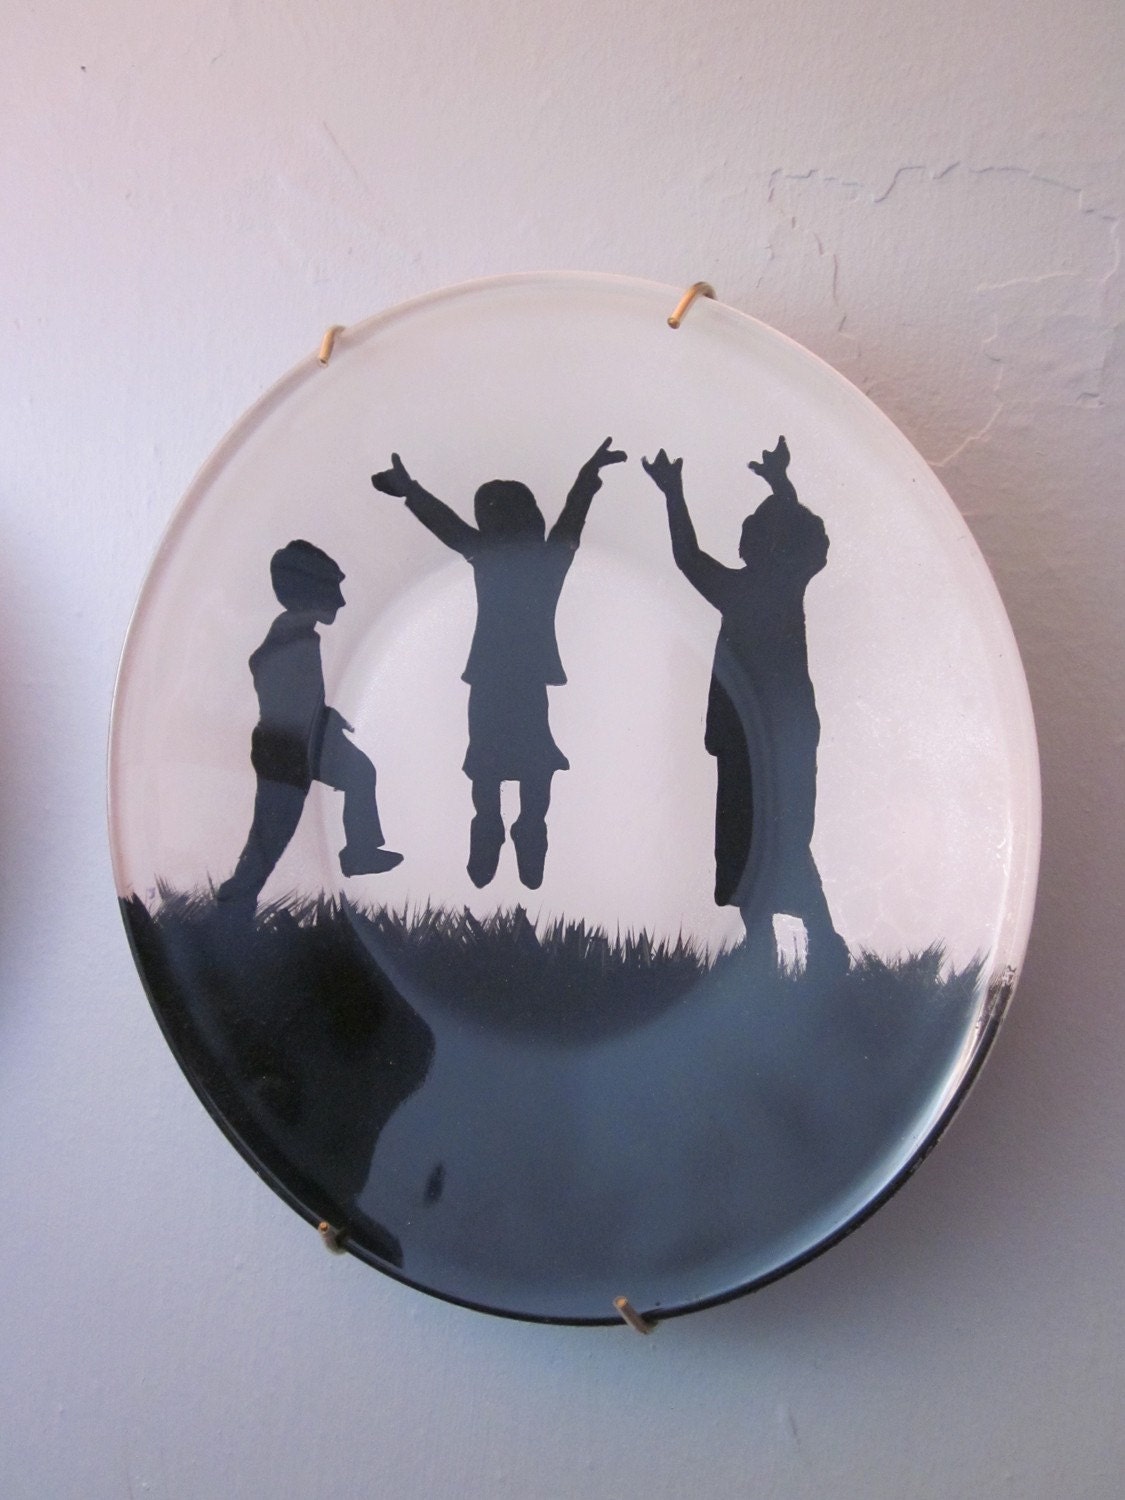 Handpainted Silhouette Plate - Child's Play